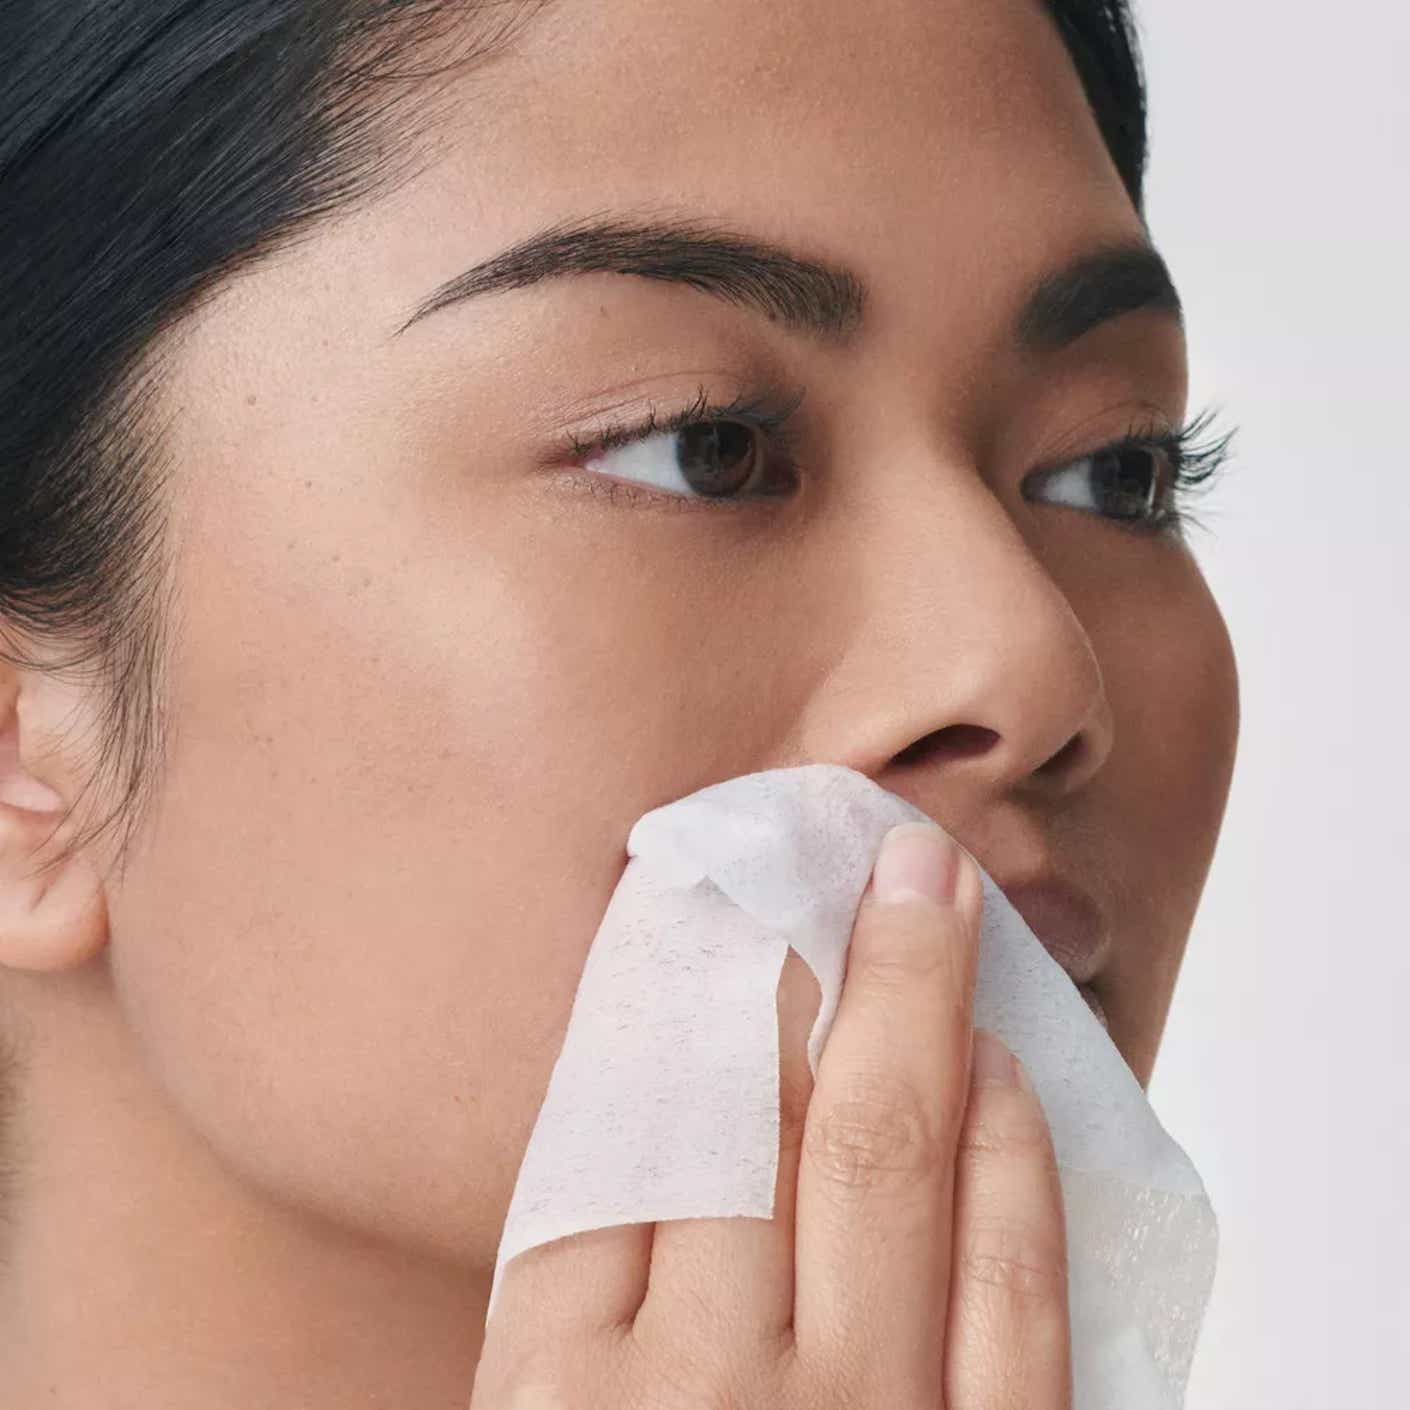 A woman holds an after-wax towel wipe up to her lip.